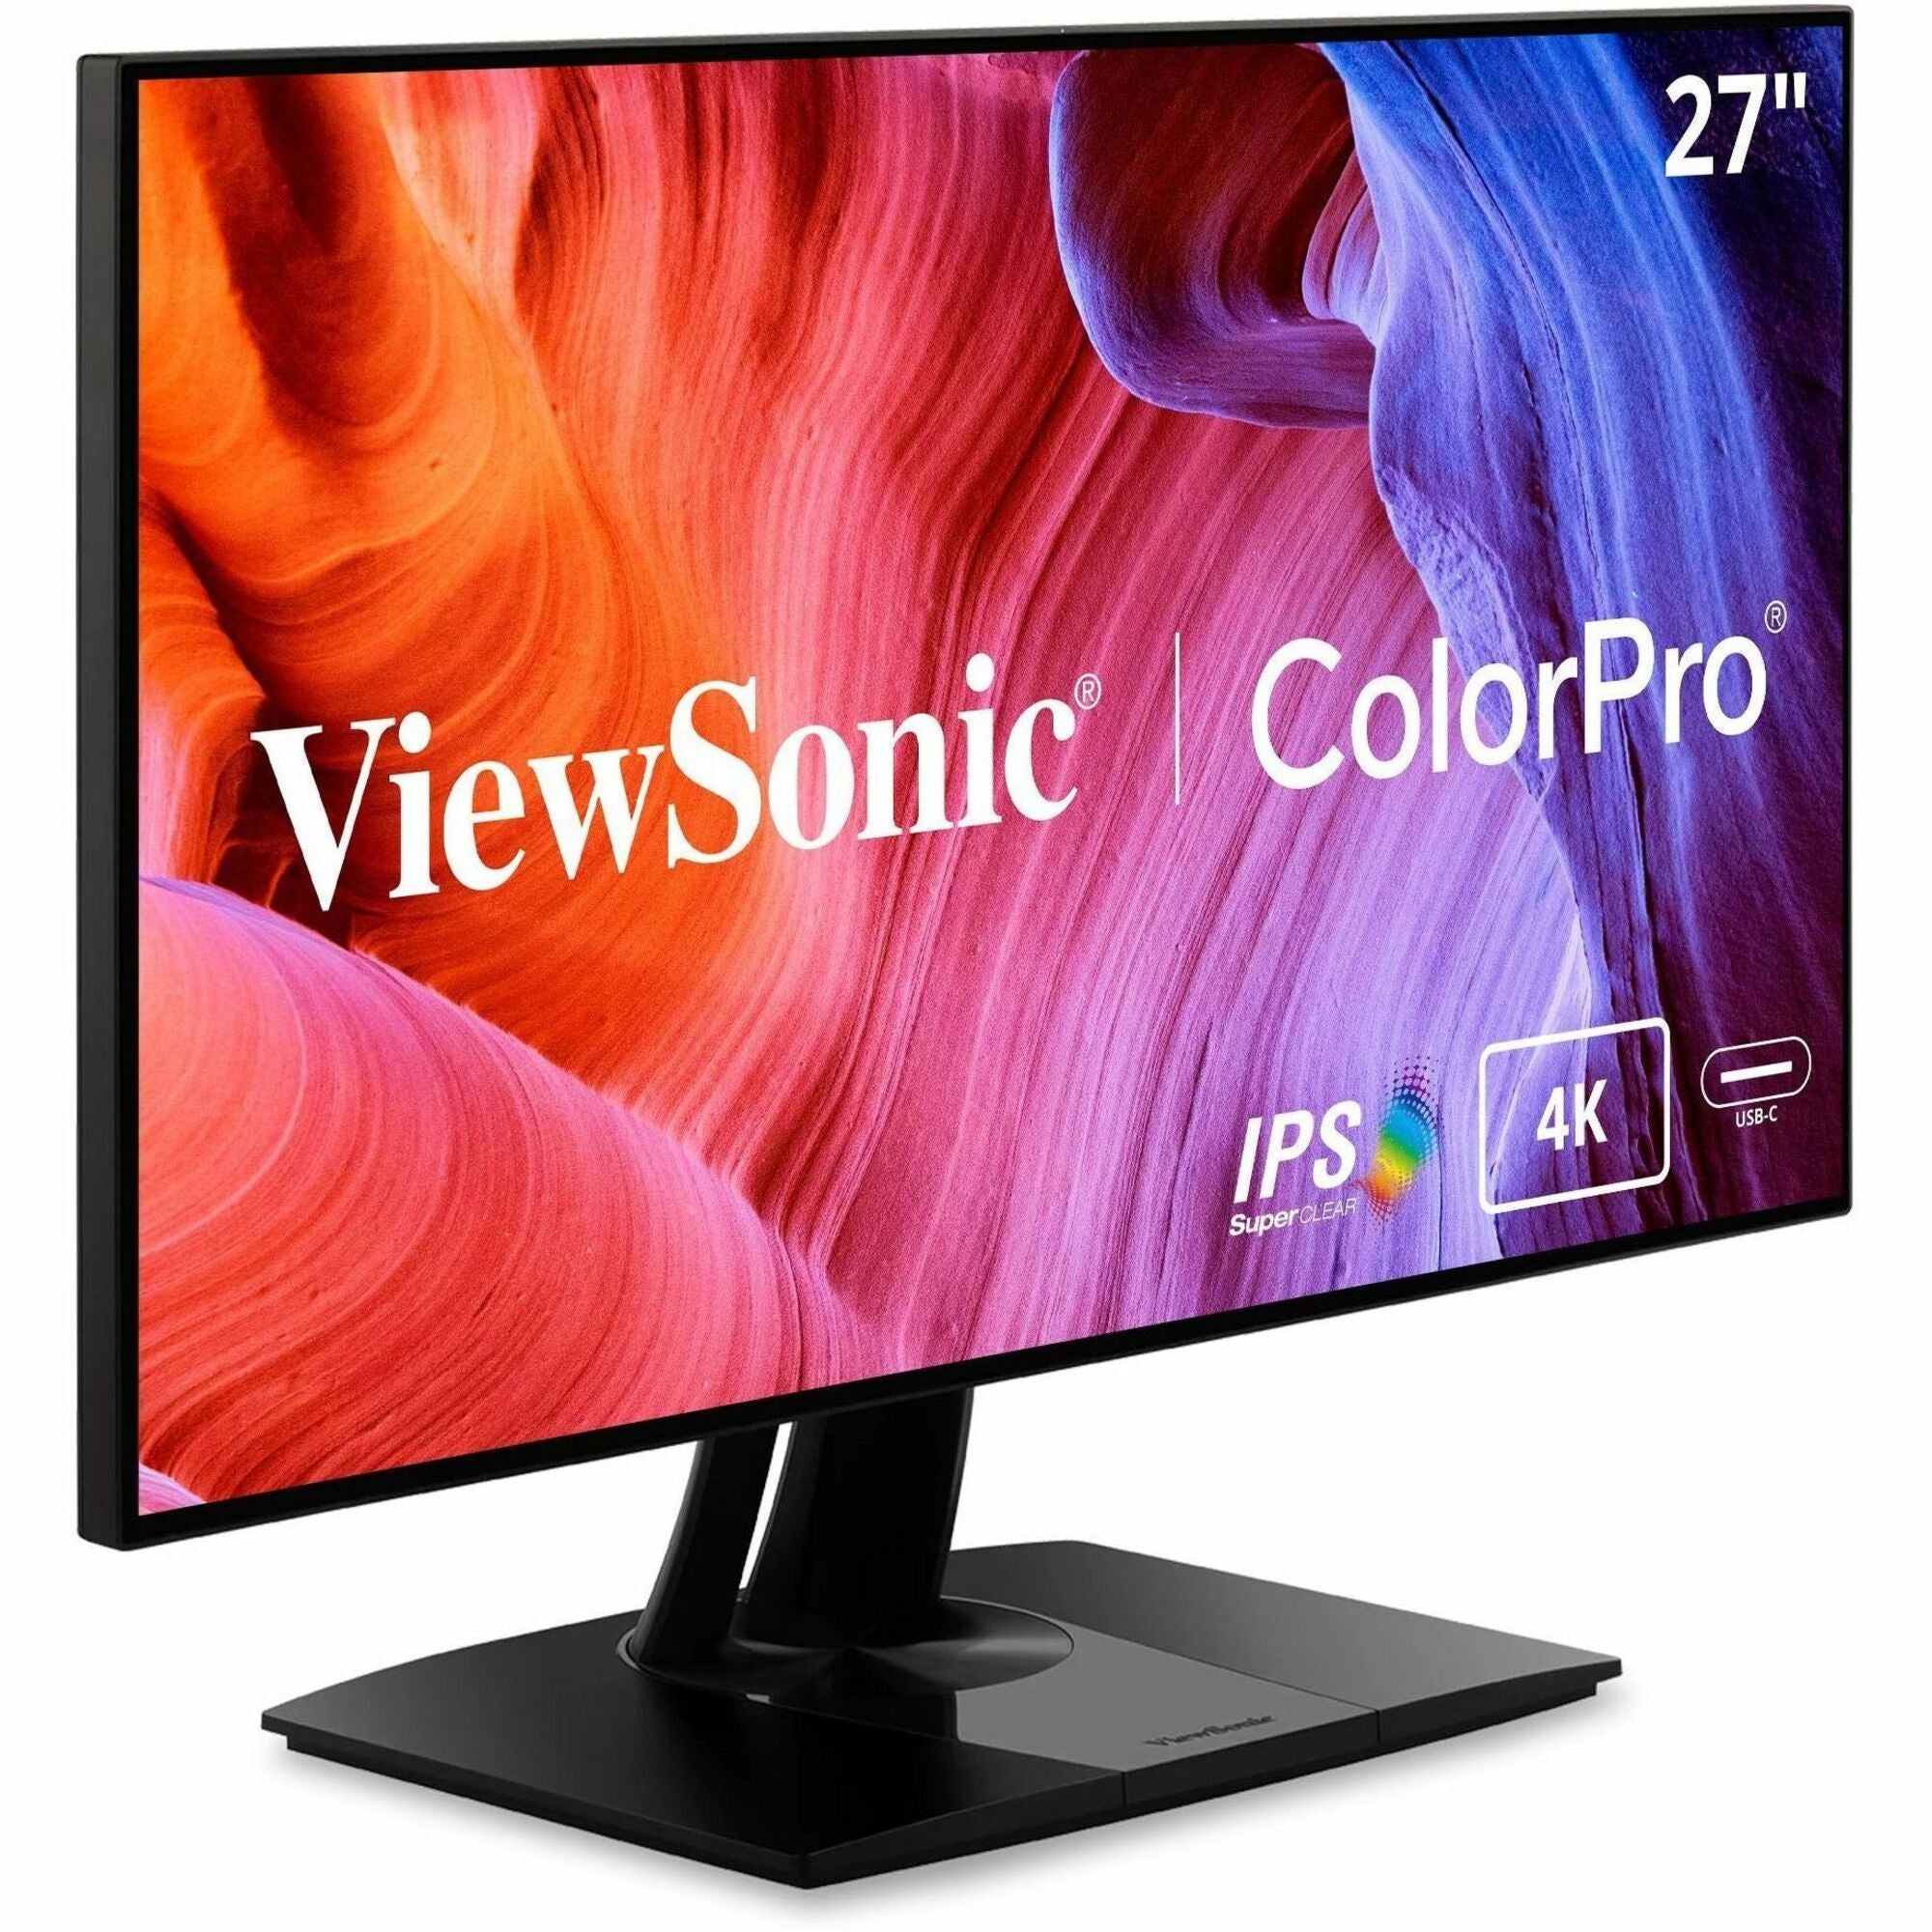 viewsonic-vp2768a-4k-27-inch-premium-ips-4k-monitor-with-advanced-ergonomics-colorpro-100%-srgb-rec-709-14-bit-3d-lut-eye-care-hdmi-usb-c-displayport-for-professional-home-and-office-colorpro-vp2768a-4k-4k-uhd-monitor-with-ergonomics-usb-c_vewvp2768a4k - 1